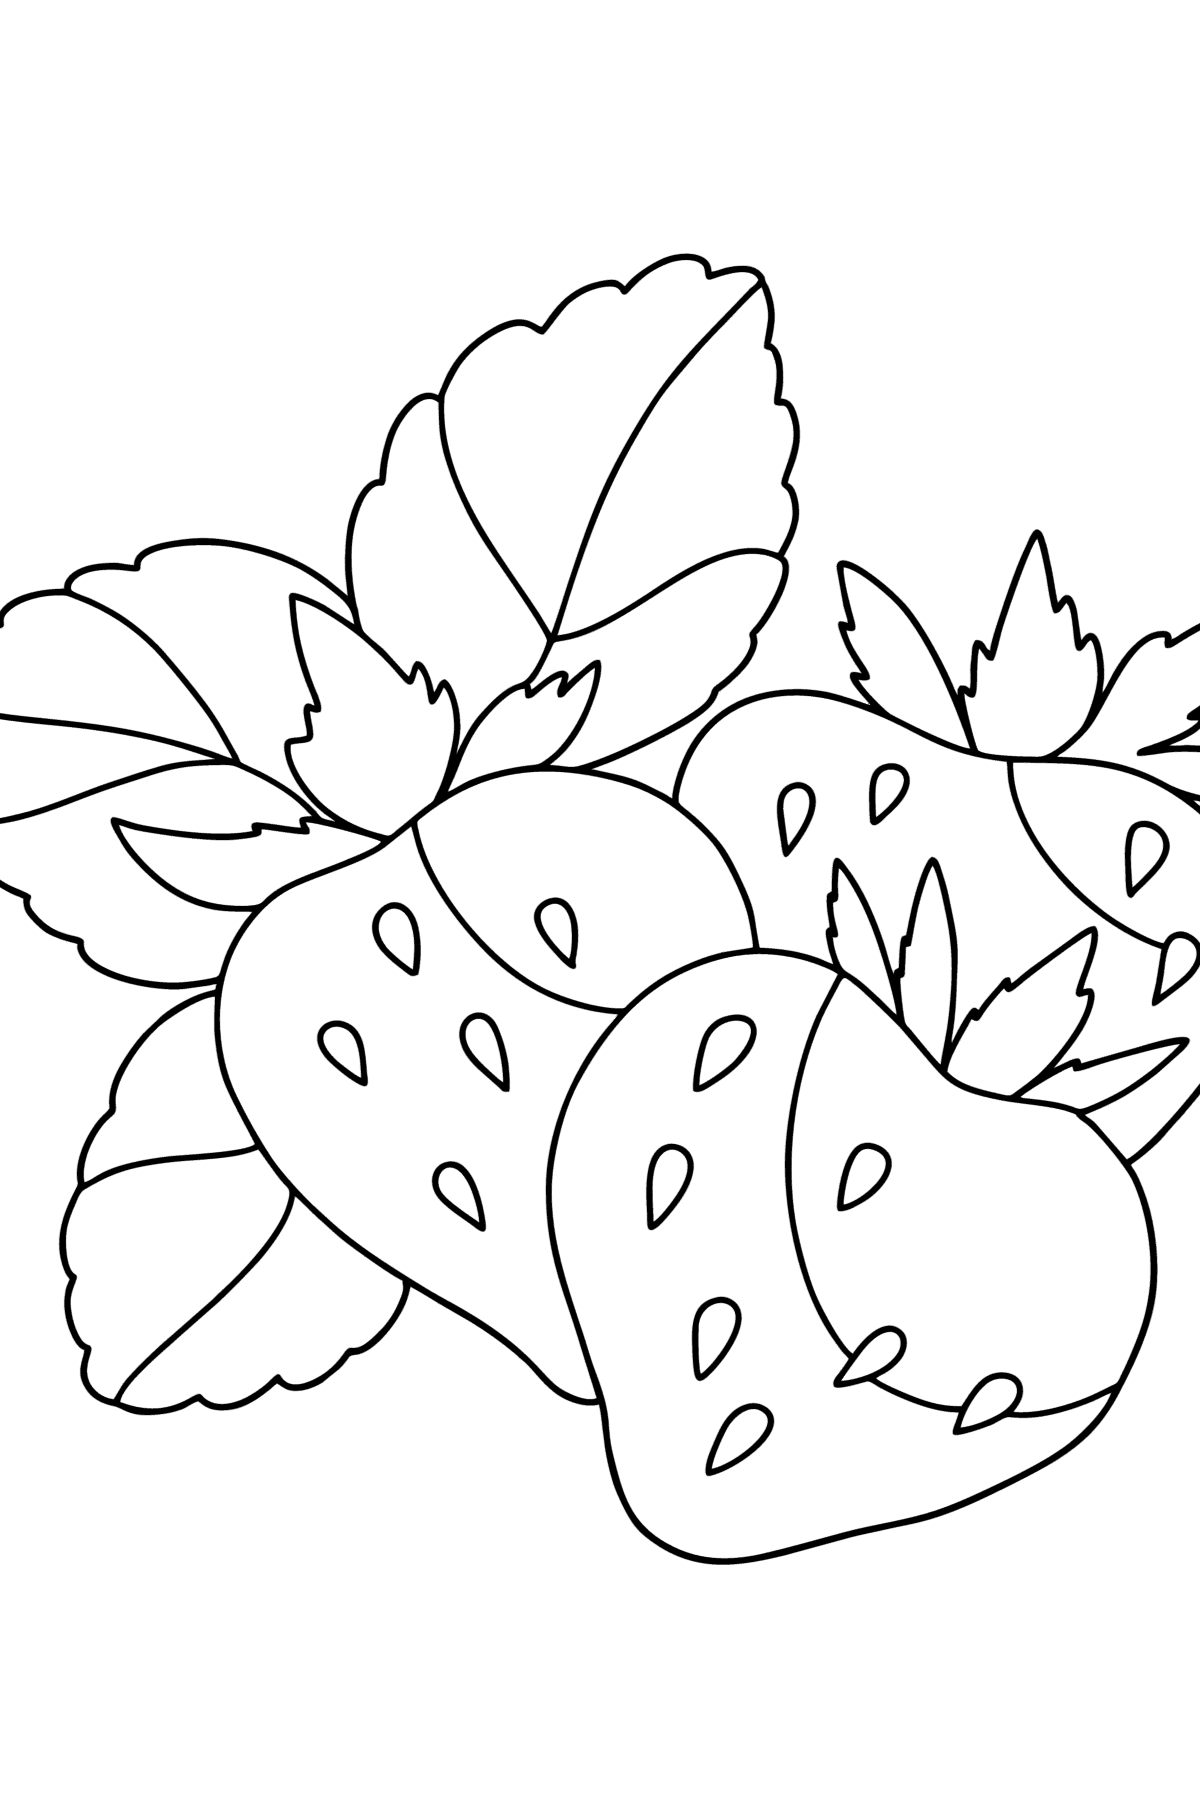 Ripe strawberries сoloring page - Coloring Pages for Kids